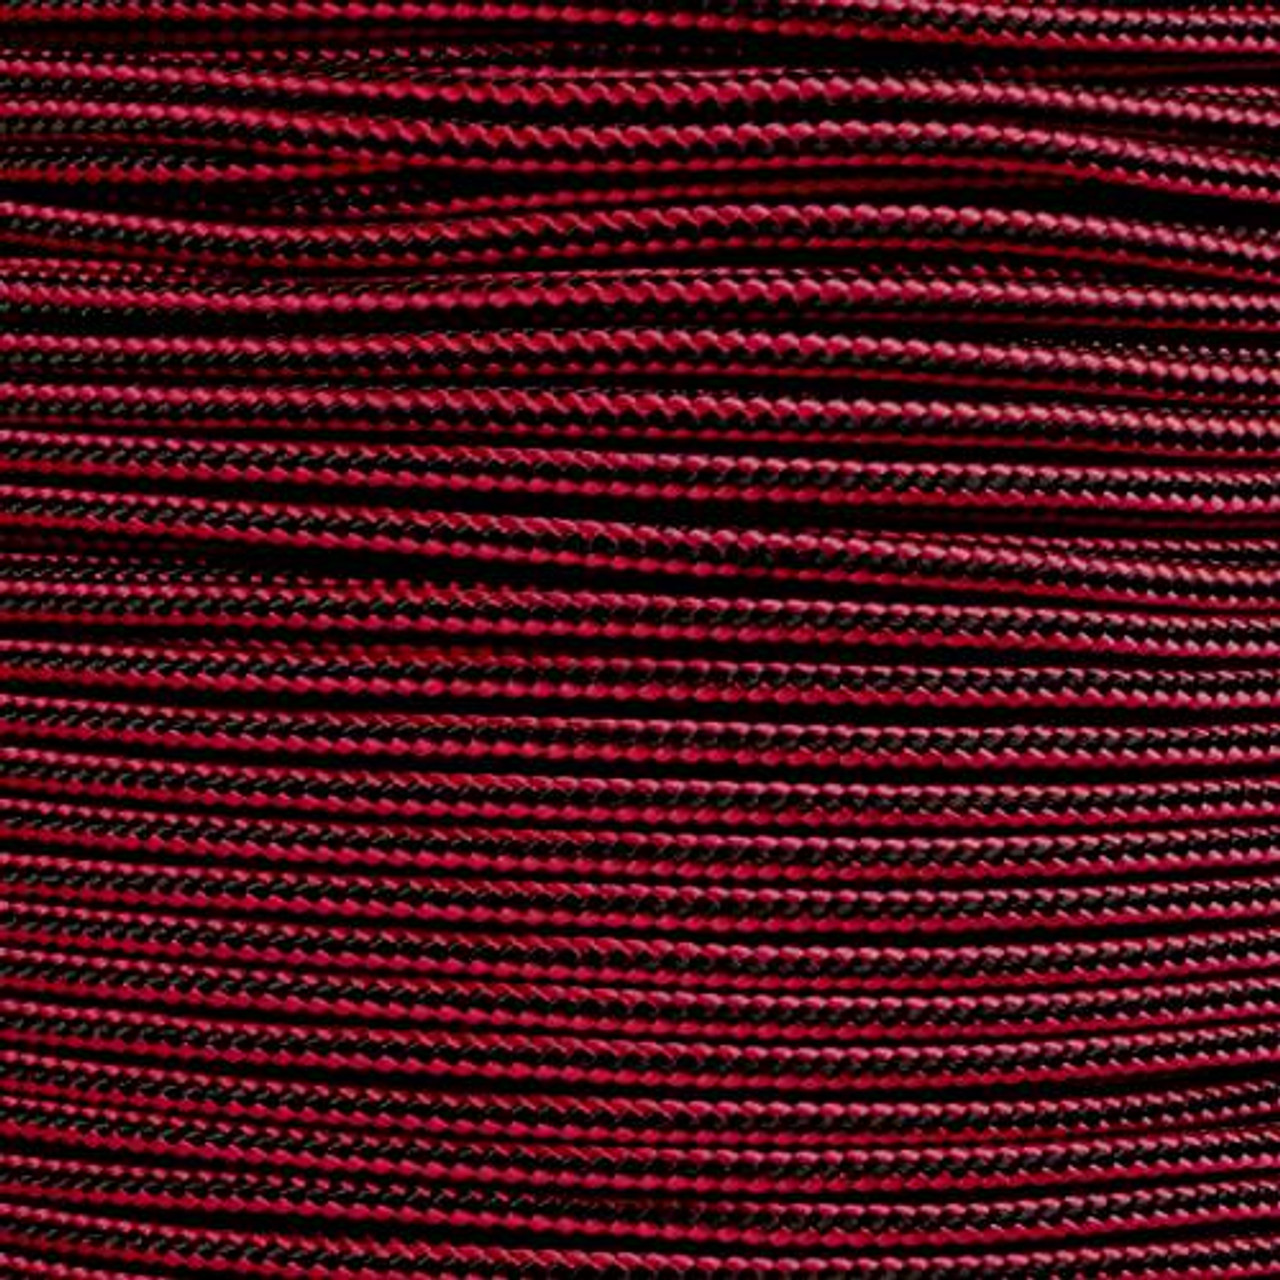 Licorice 425 3-Strand Commercial Grade Paracord